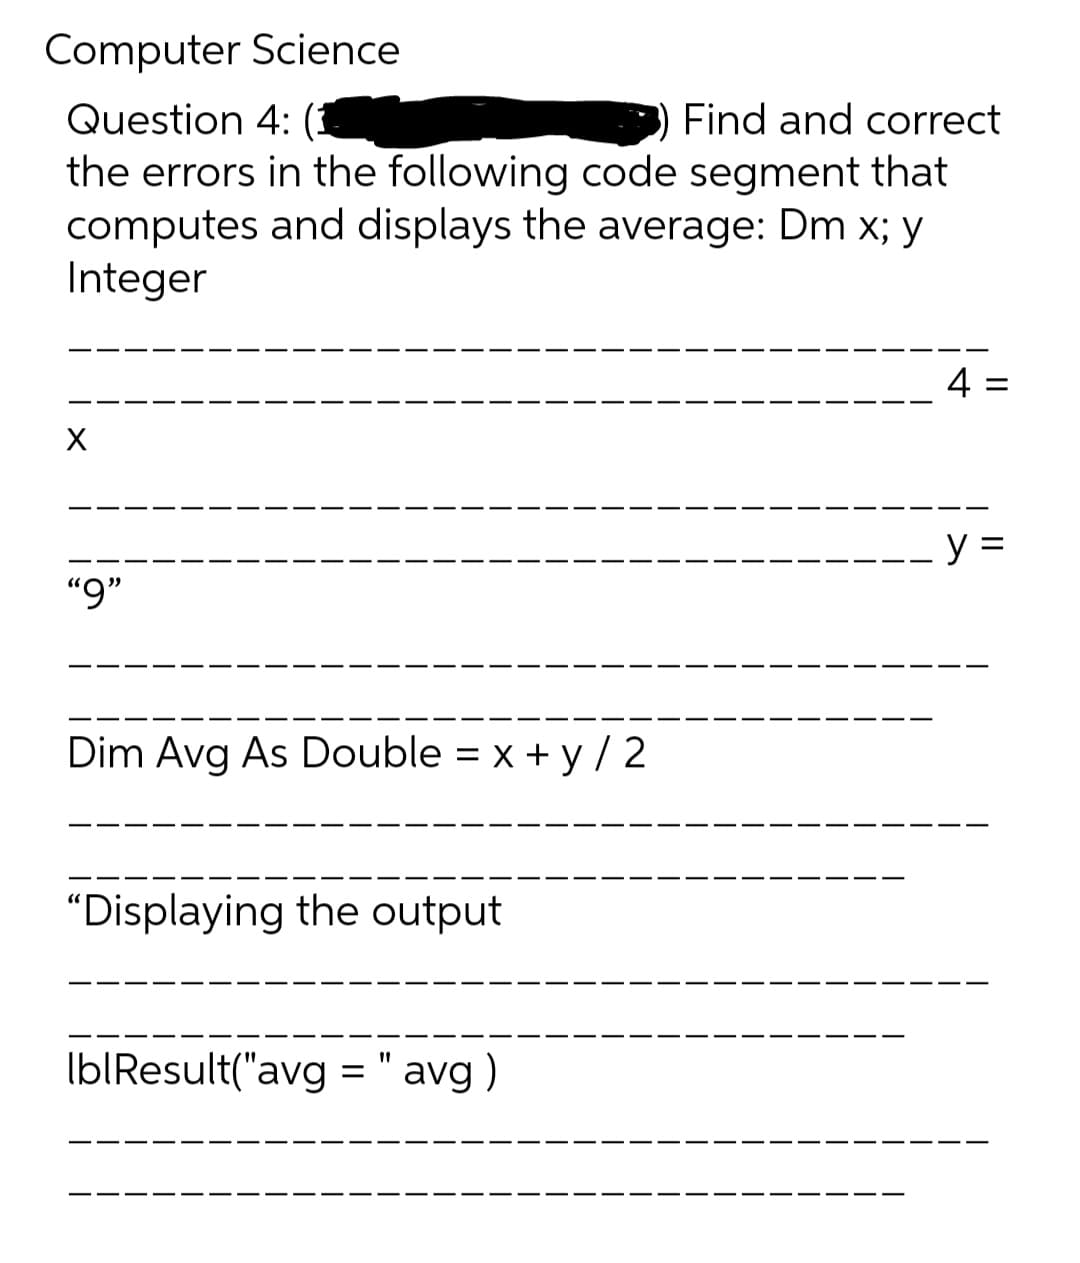 Computer Science
Question 4: (3
the errors in the following code segment that
computes and displays the average: Dm x; y
Integer
Find and correct
4 =
--- y =
“9"
Dim Avg As Double = x + y / 2
"Displaying the output
Ib|Result("avg = " avg )
